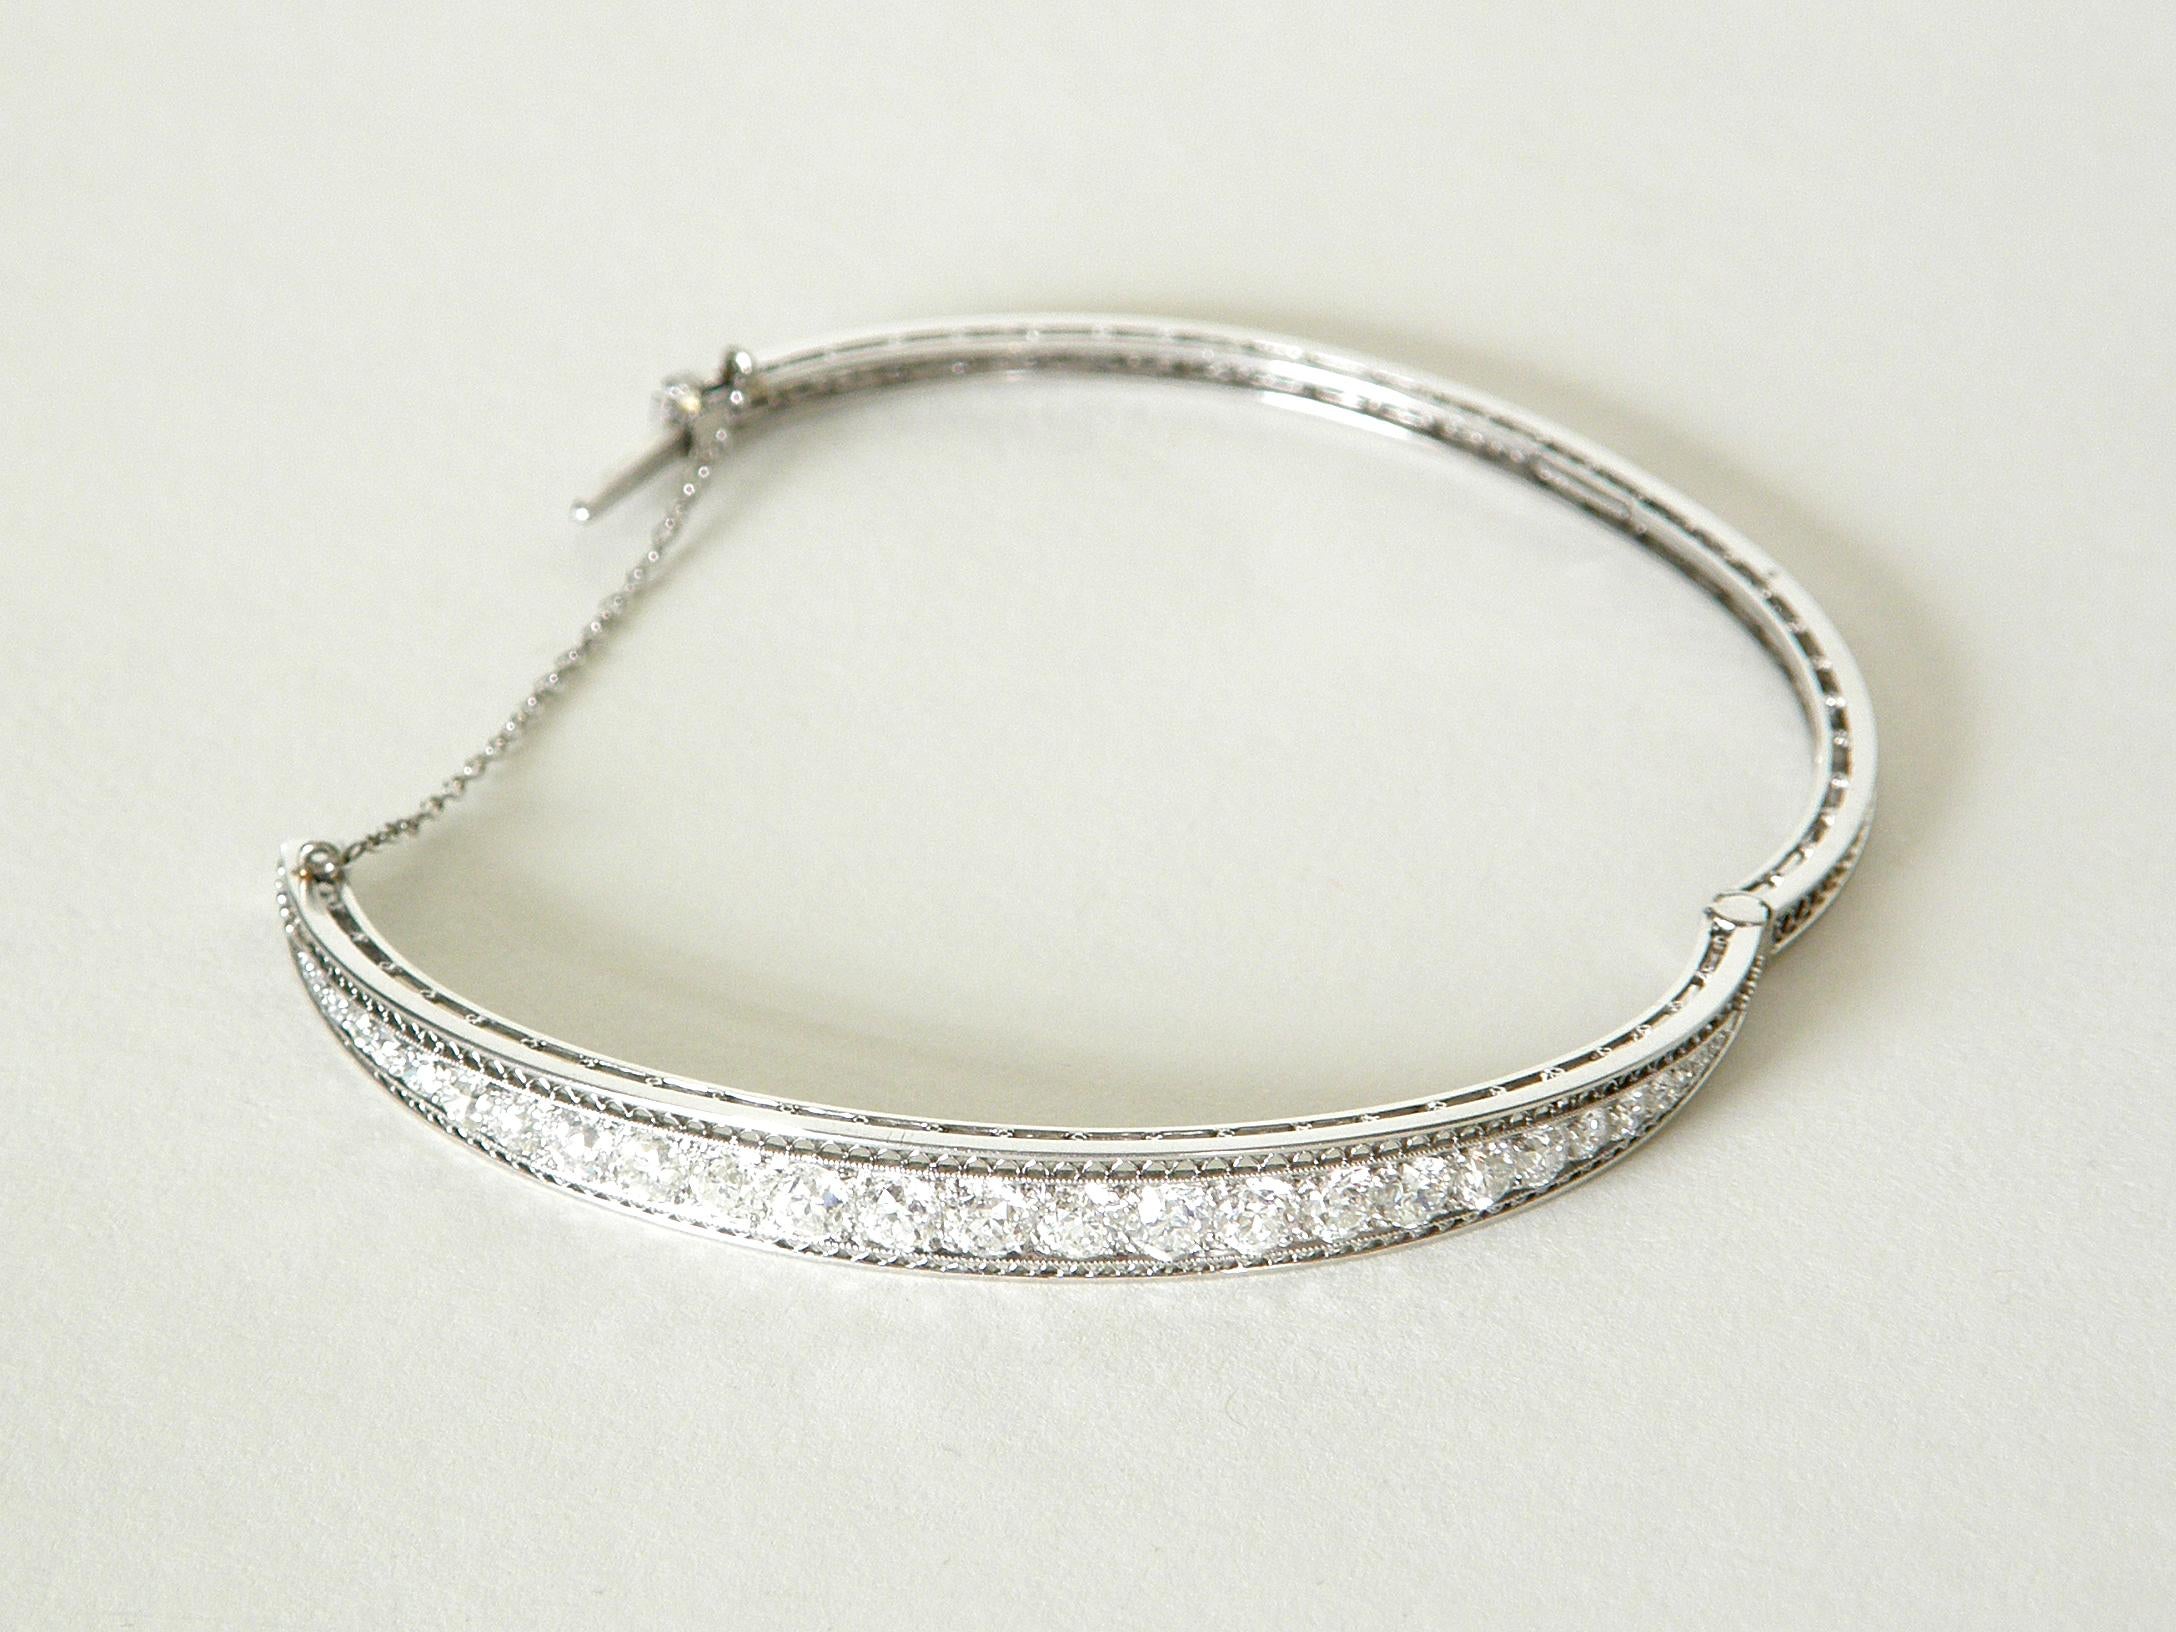 This diamond and platinum, art deco era bracelet from Tiffany & Co. is perfectly elegant. The refined design places the focus on the diamonds, allowing them to shine and beautifully accent the wrist of the wearer. 

The circa 1920s or 1930s hinged,